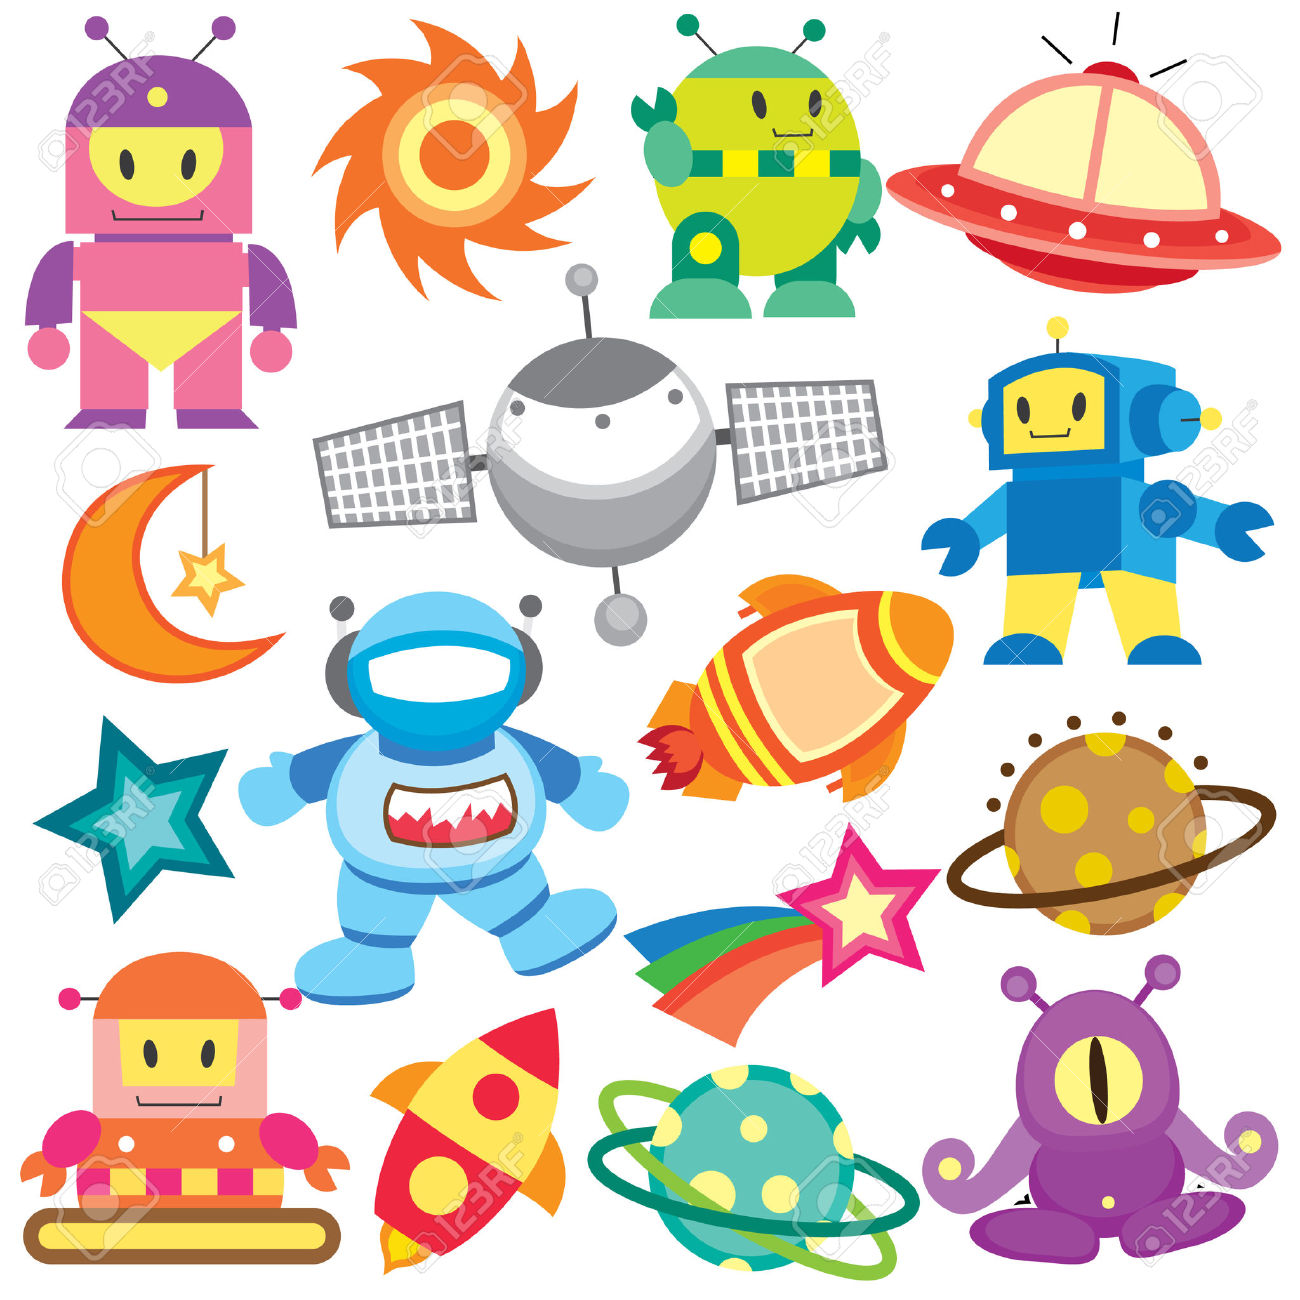 Vector - outer space and robot clip art set